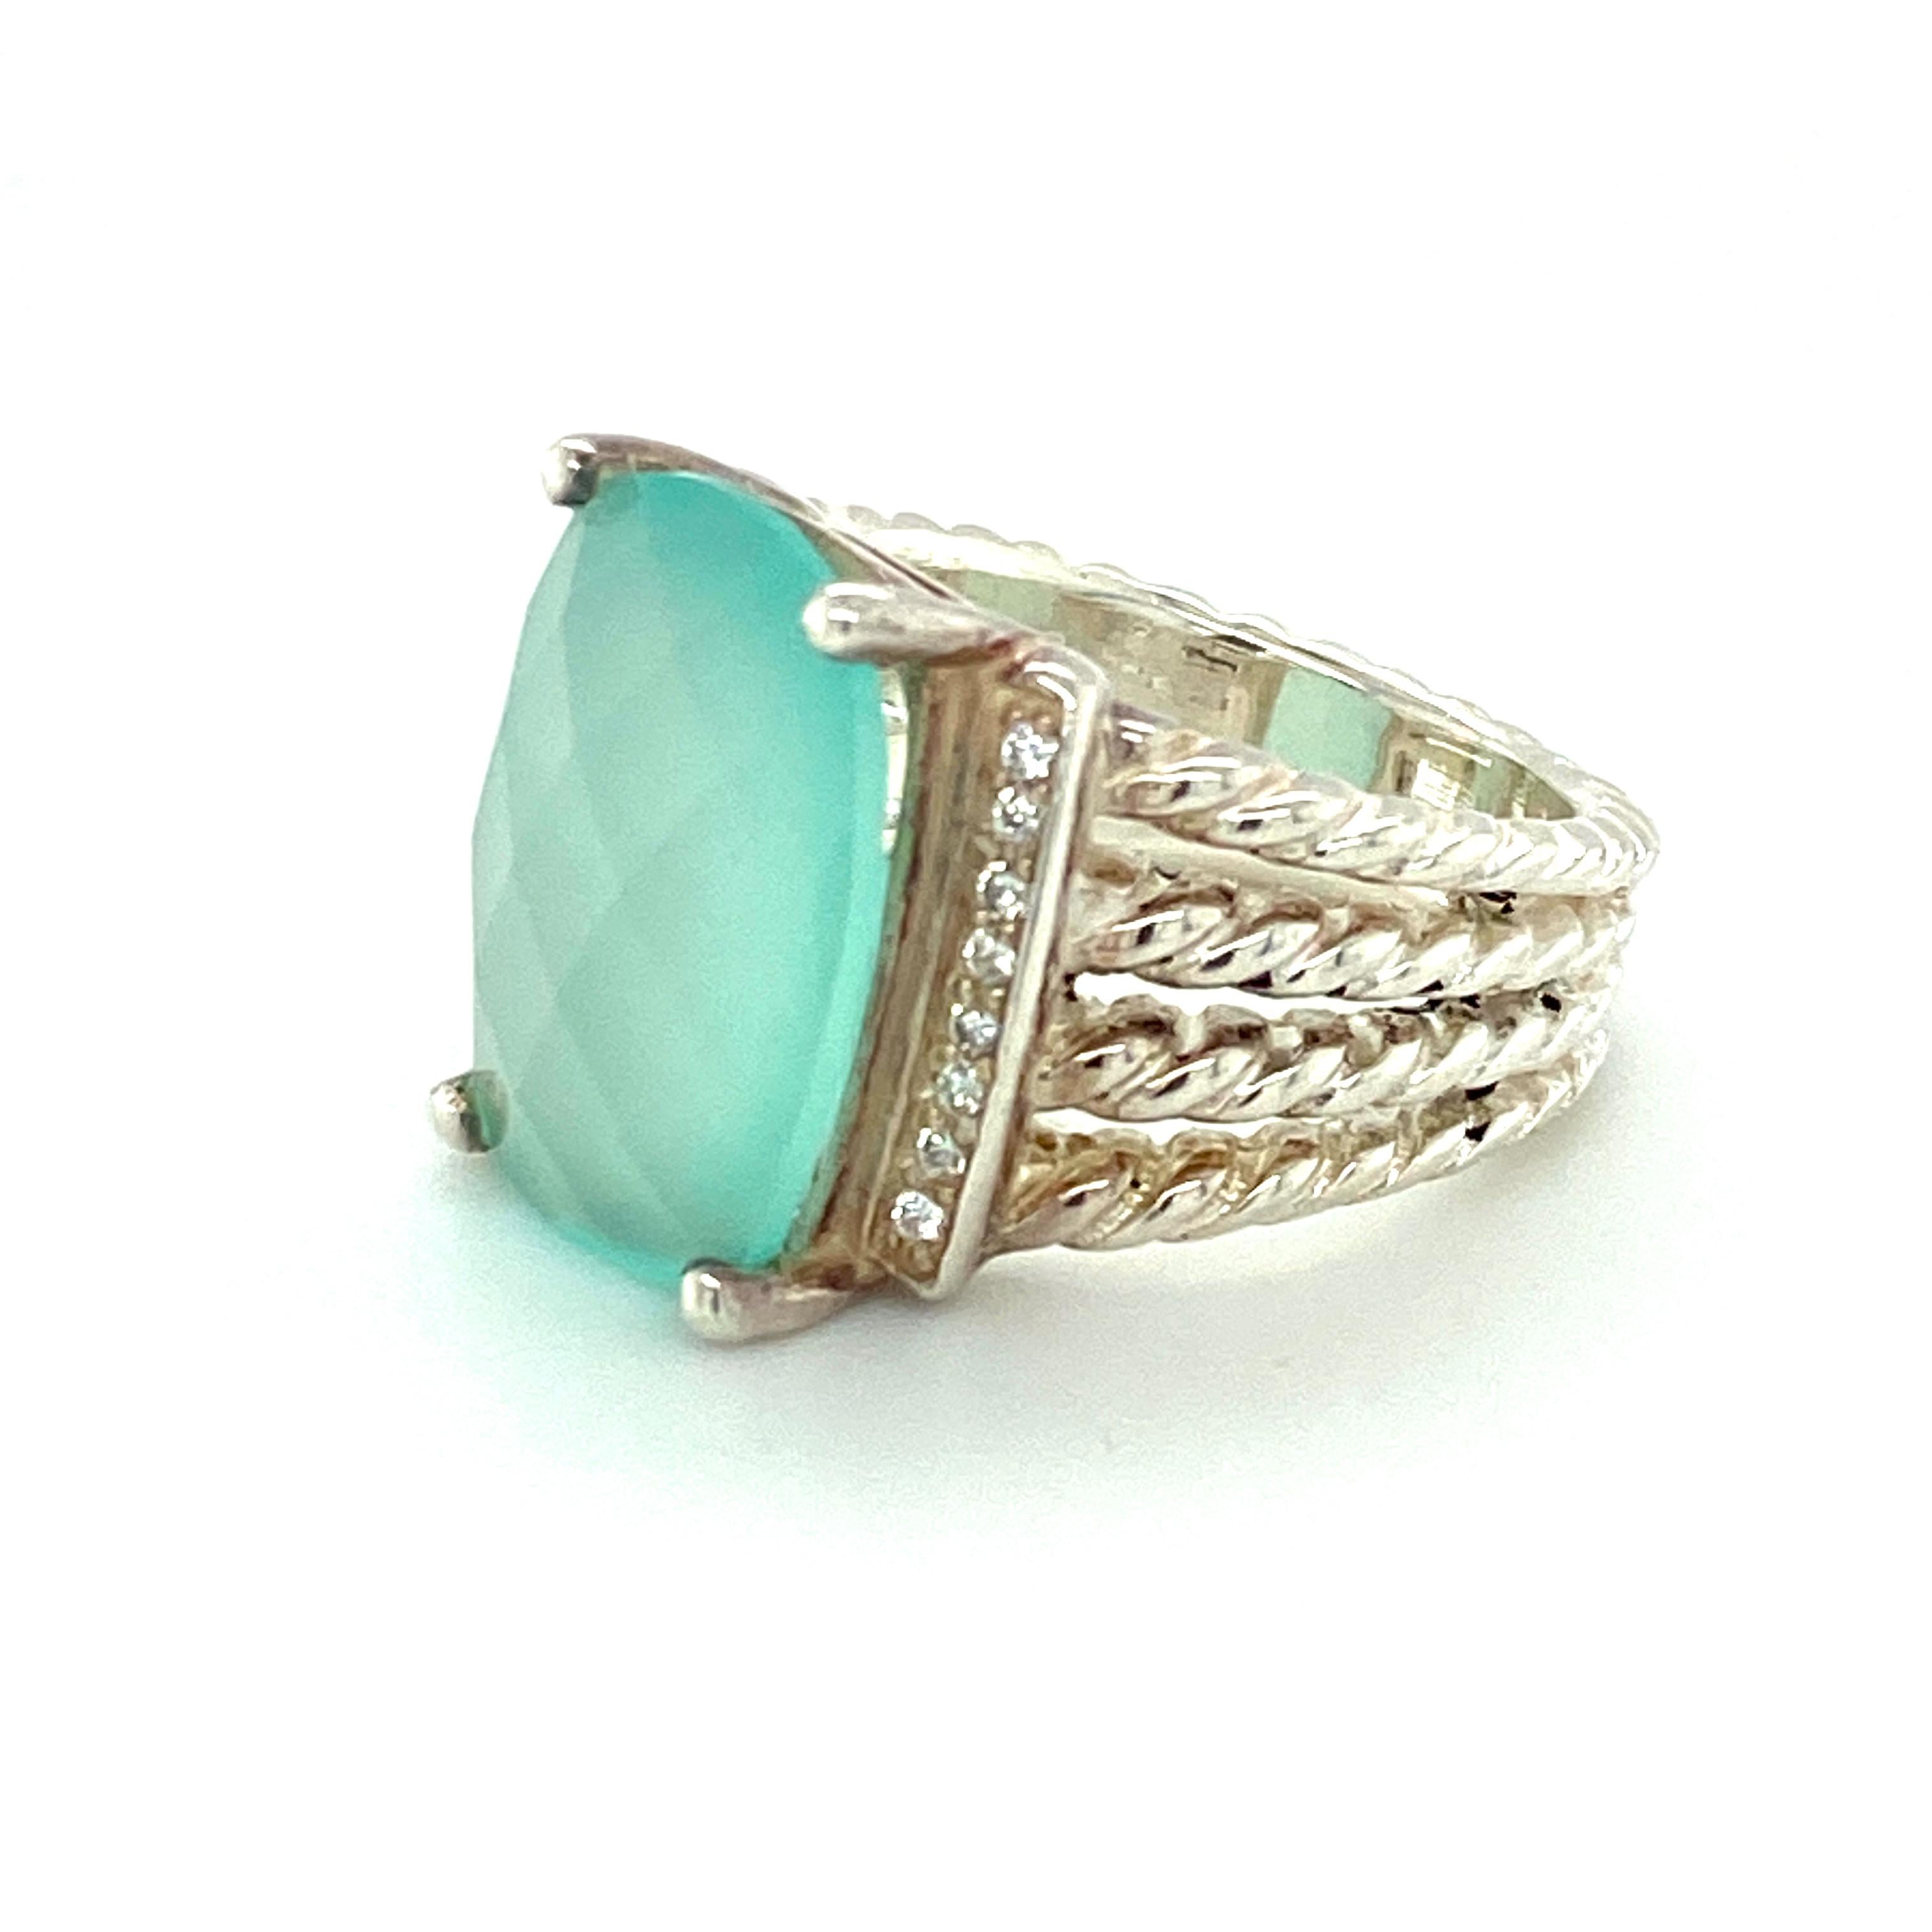 This 4-cable ring model of David Yurman's coveted Wheaton Collection features 16 round brilliant diamonds of approximately 0.12ct total weight surrounding a prong-set faceted blue-green cabochon chalcedony.  The 4-cable sterling silver Wheaton ring